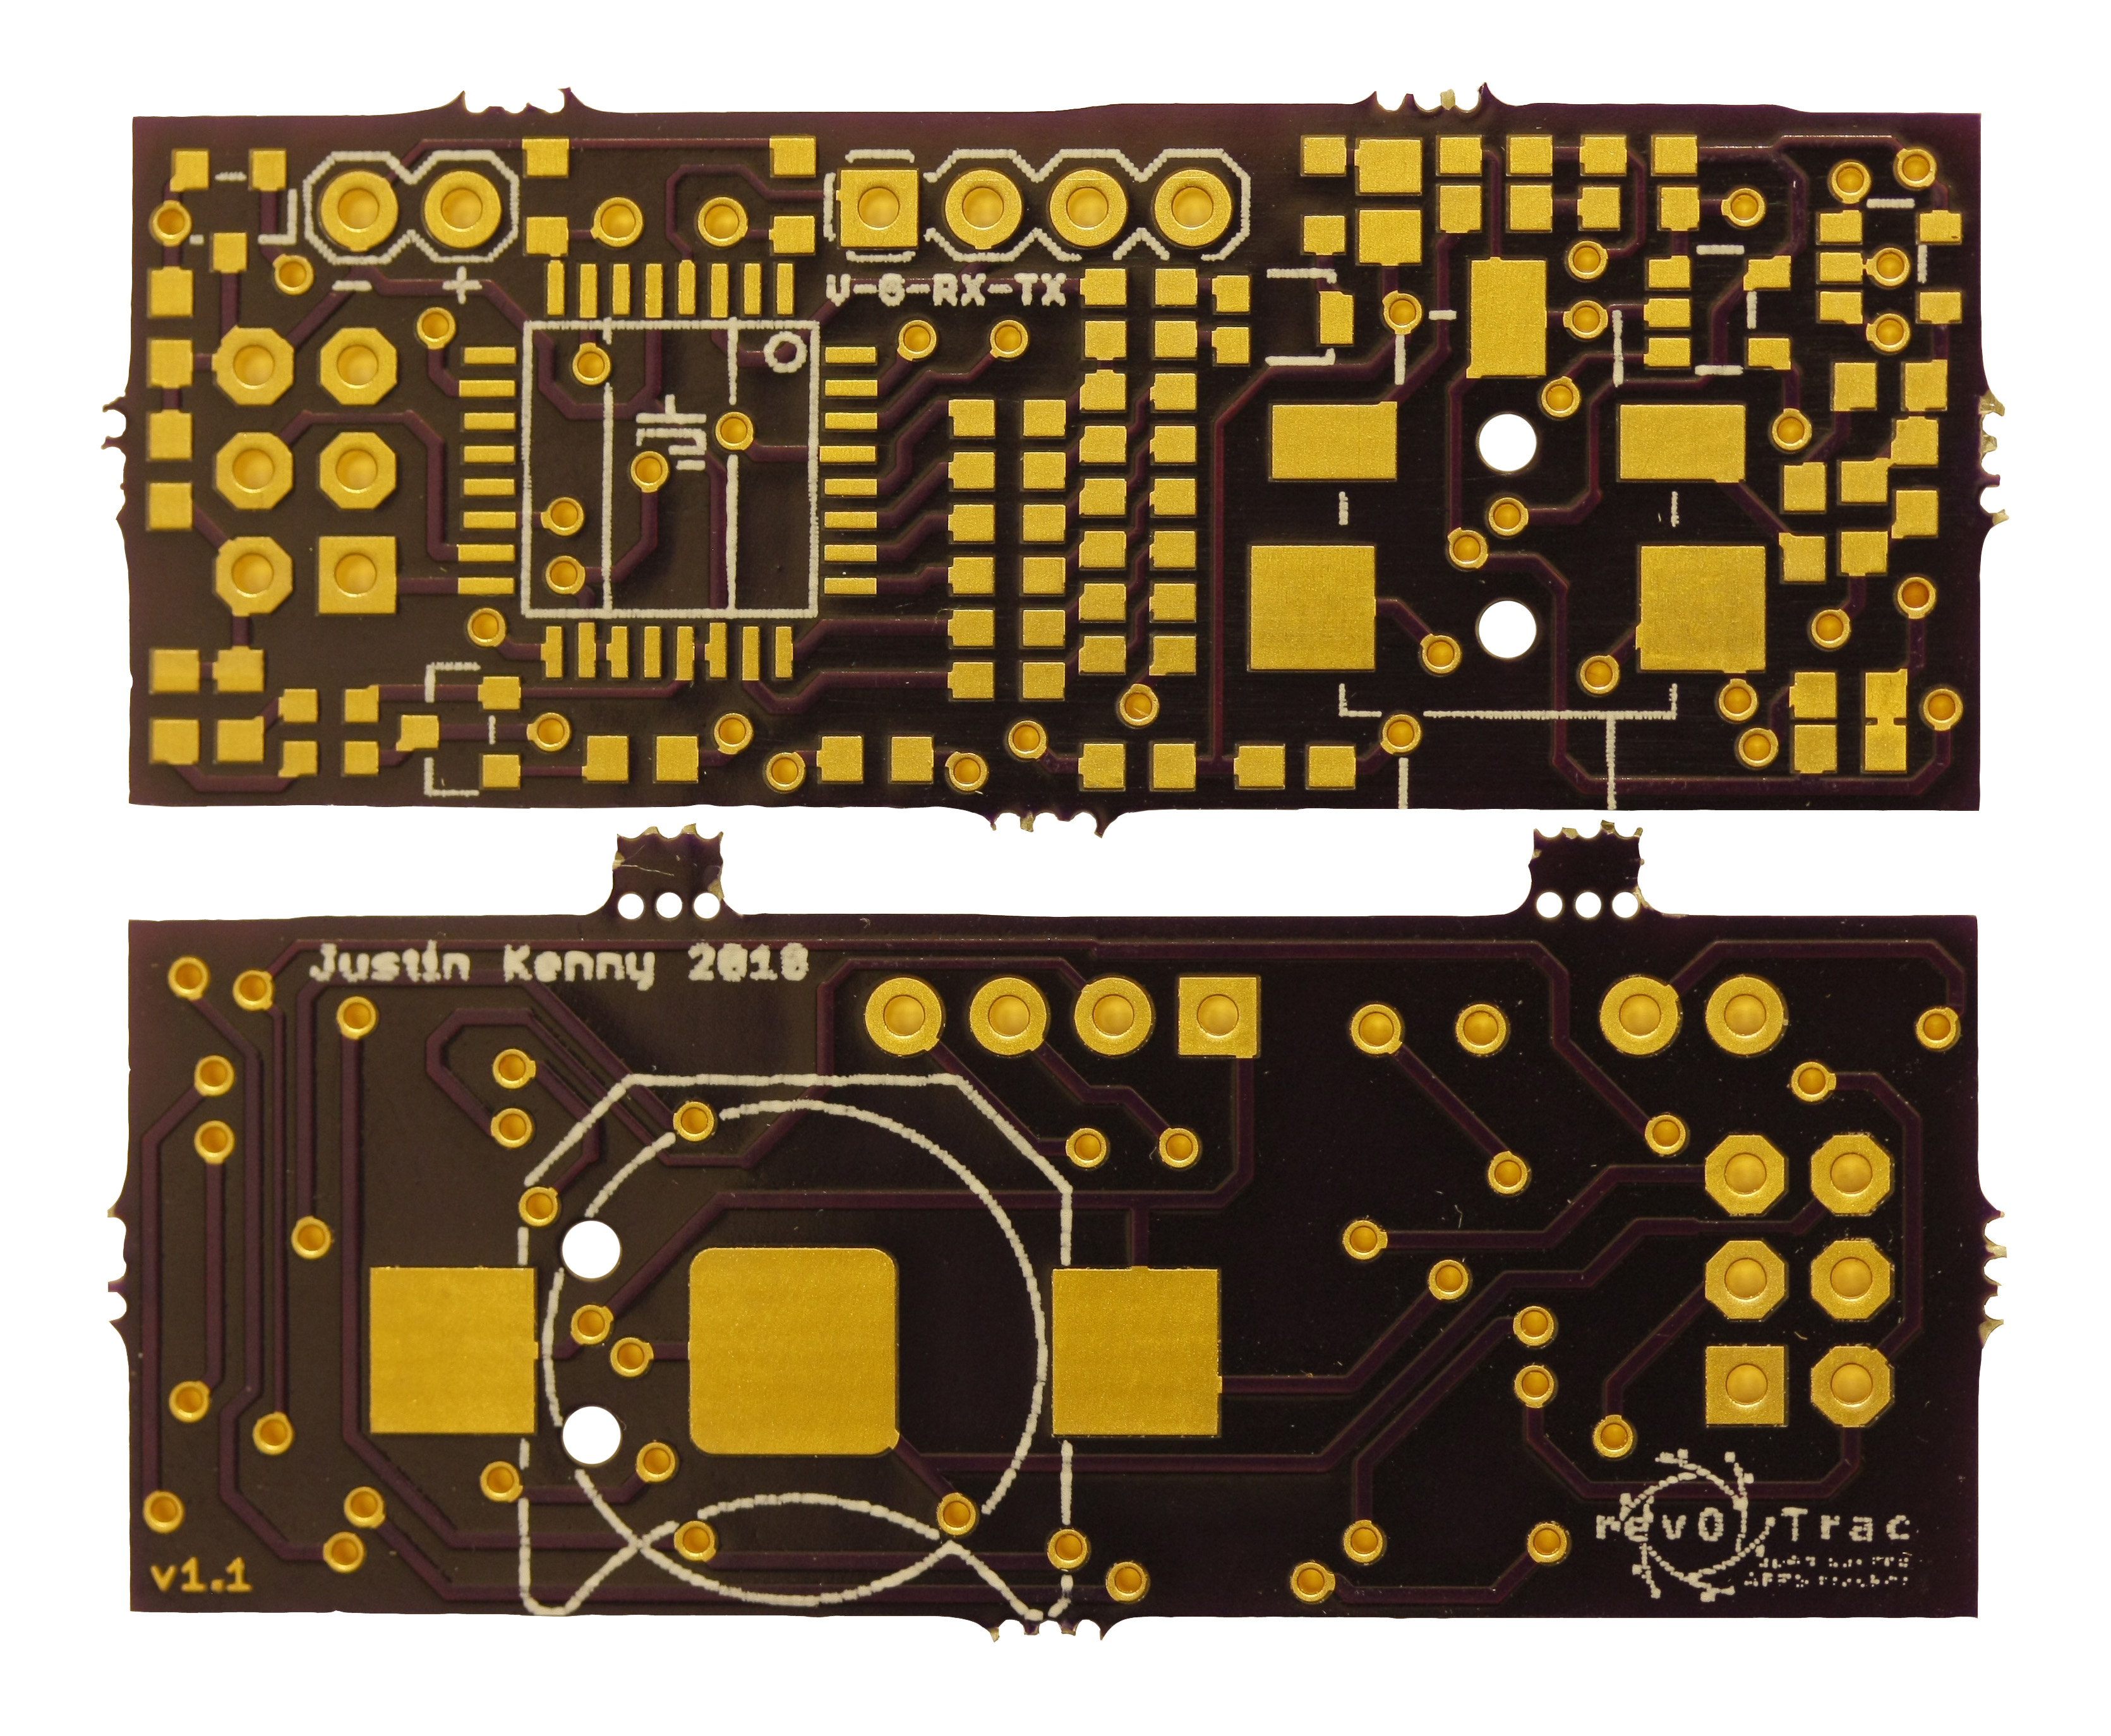 Bare PCBs, straight from the fab.